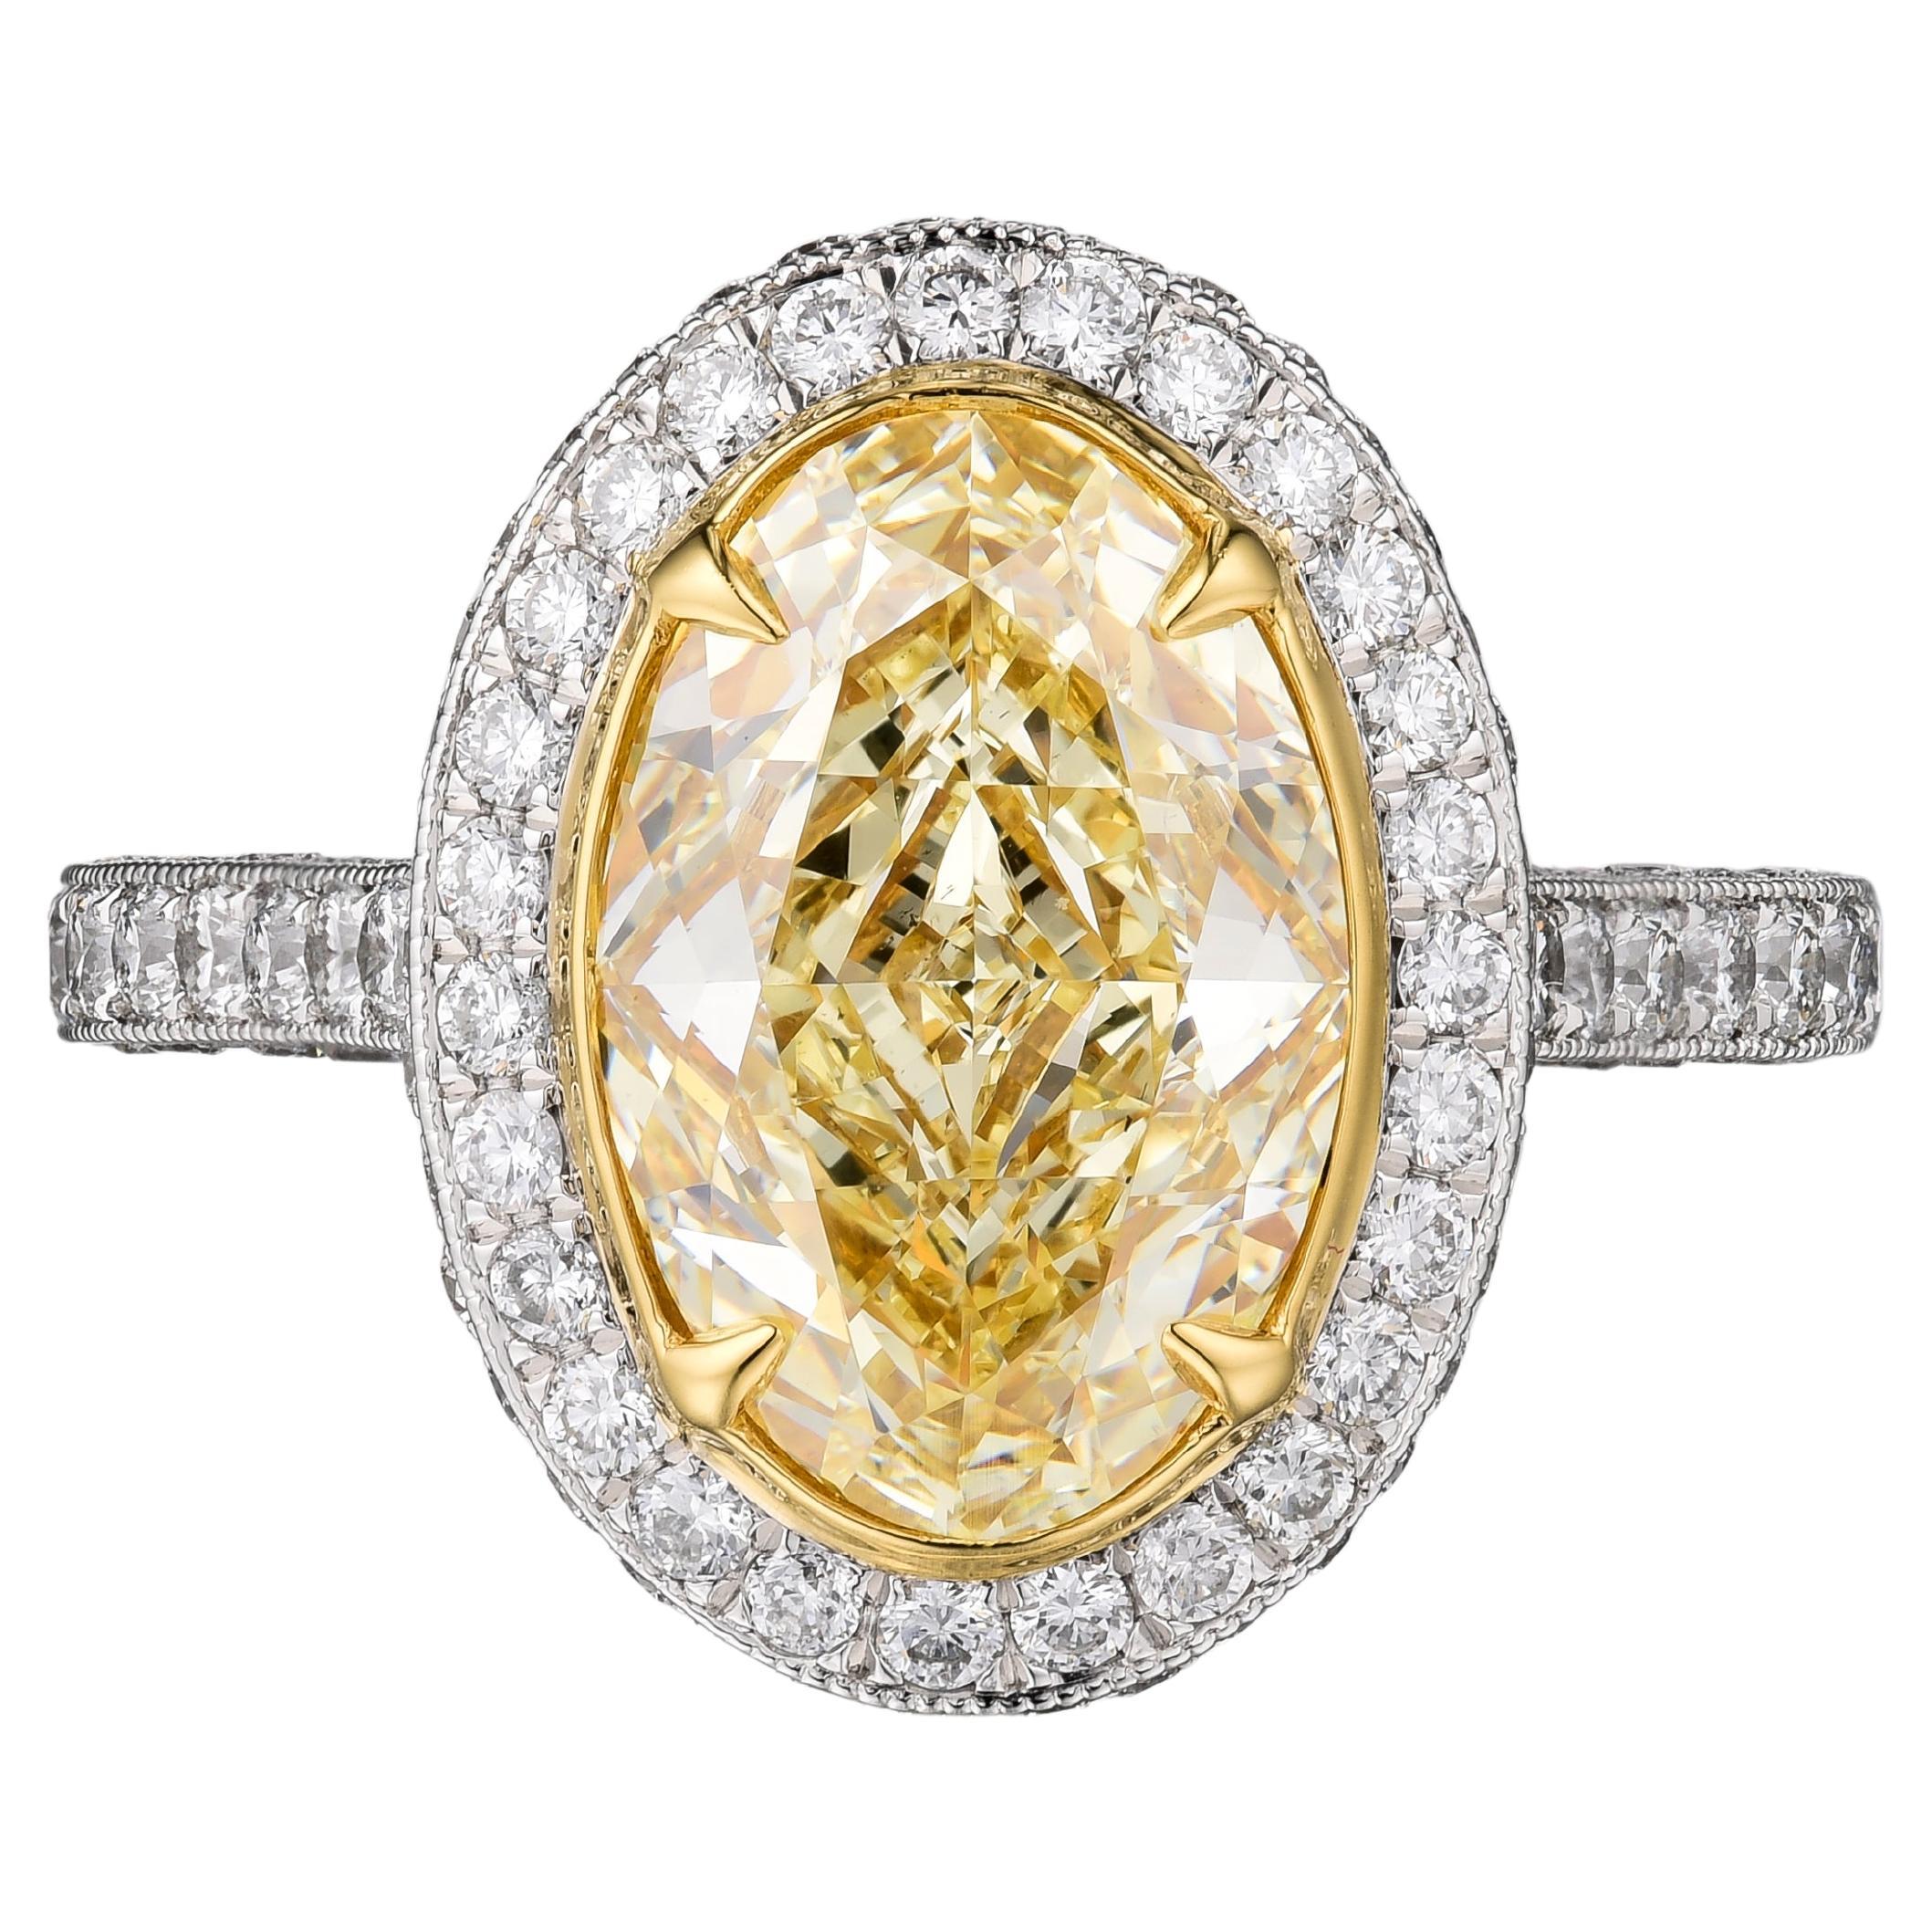 GIA Certified 2.61 Carat Light Yellow Oval Diamond Engagement Ring In Platinum